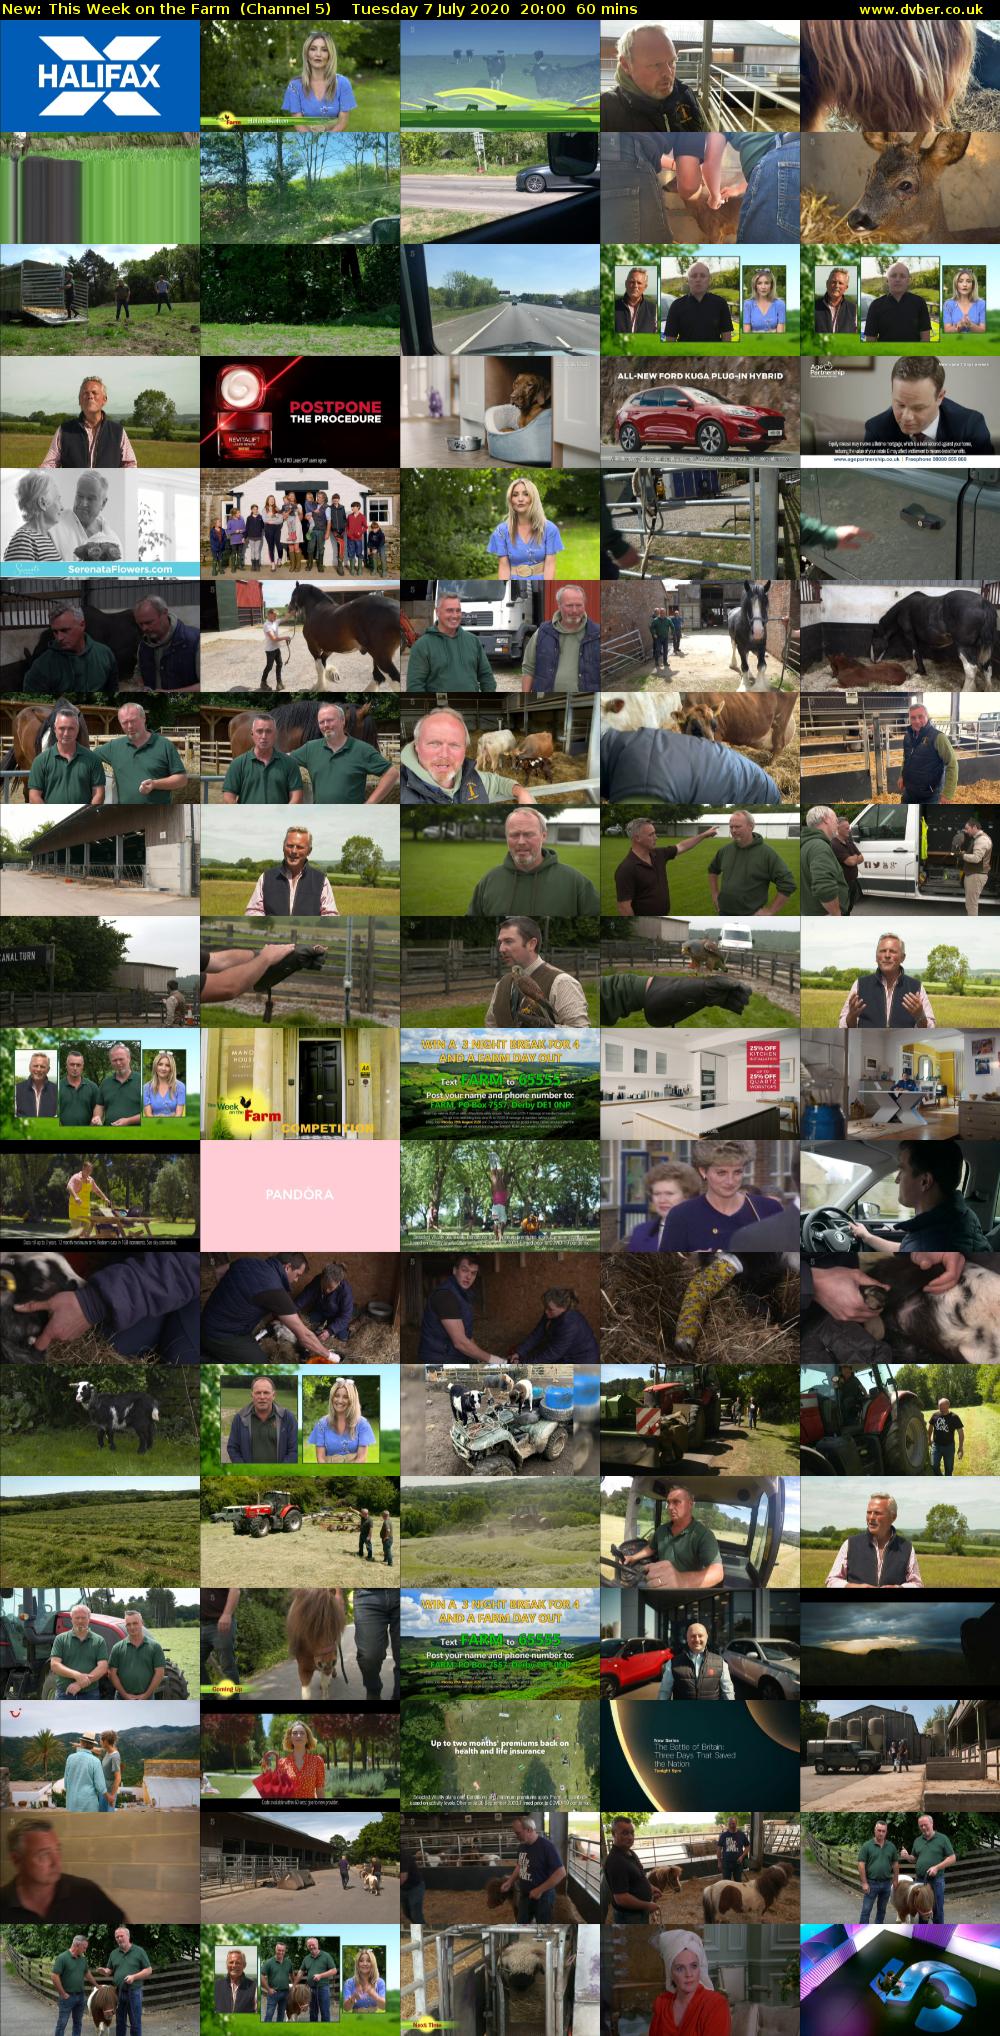 This Week on the Farm (Channel 5) Tuesday 7 July 2020 20:00 - 21:00